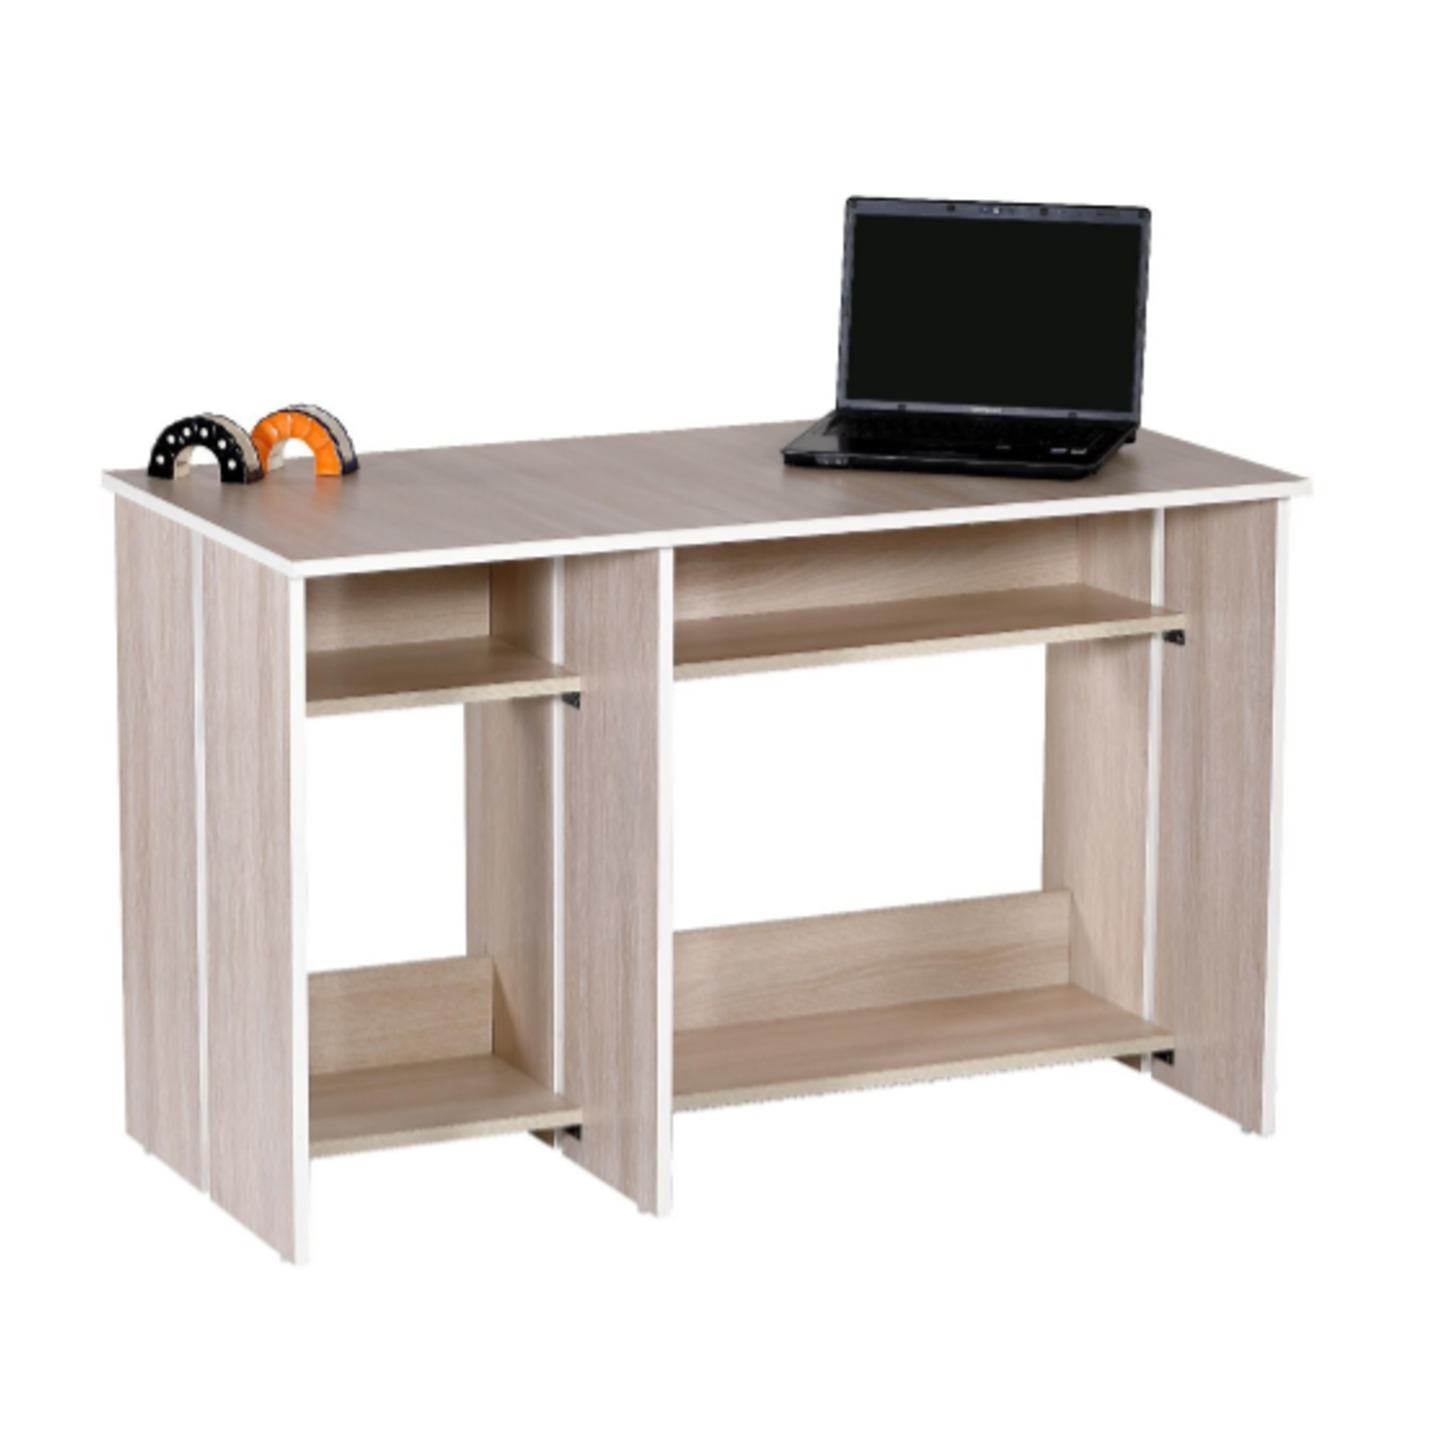 RD Study Table RD-504